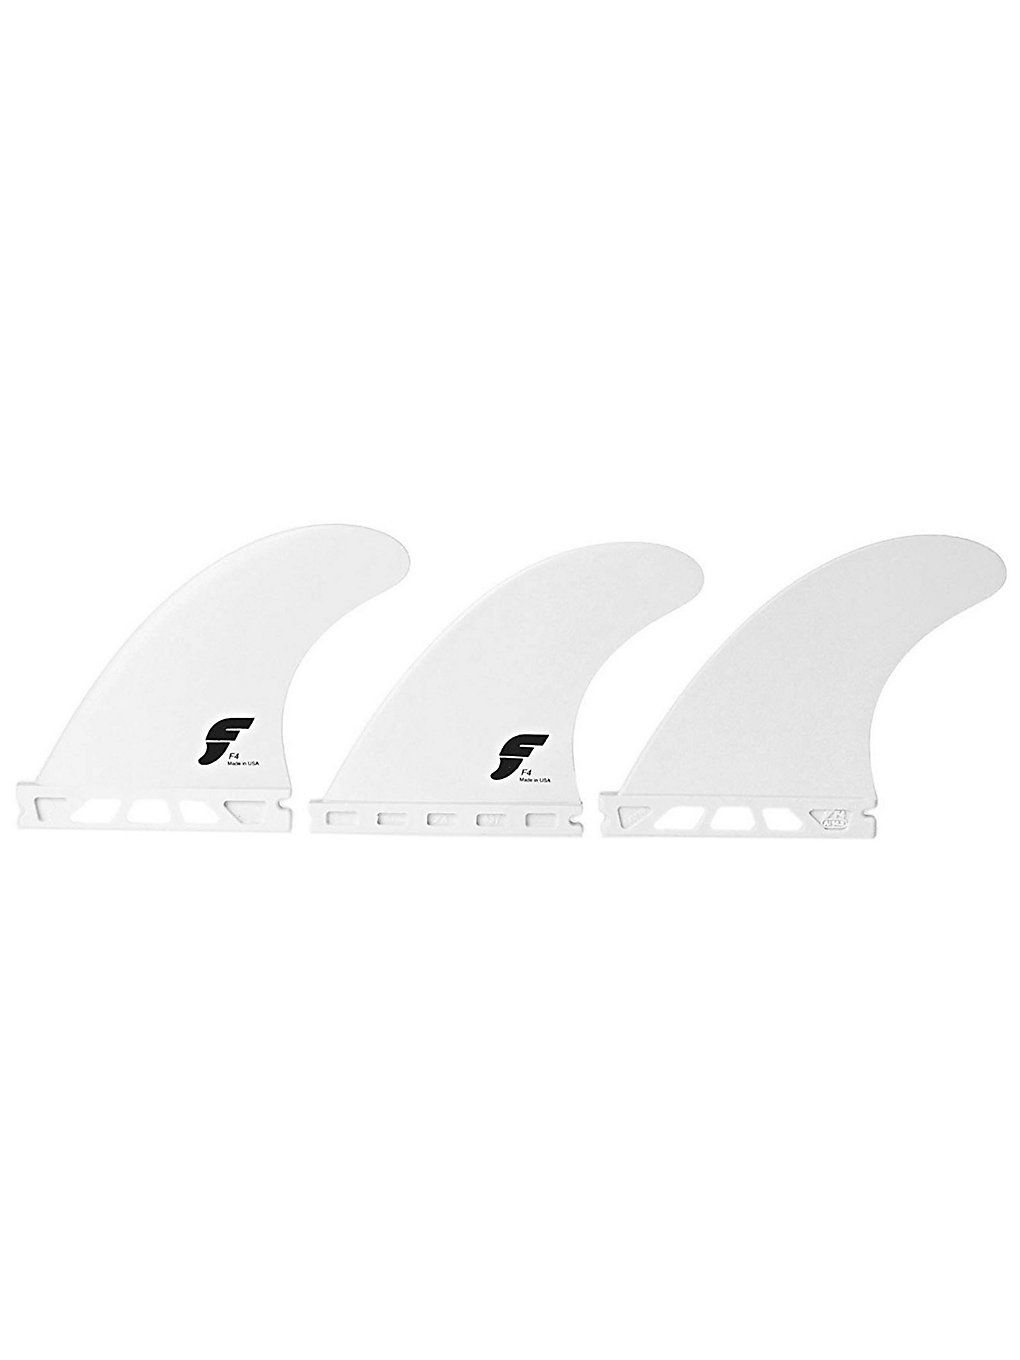 Futures Fins Thruster F4 Thermotech Fin Set blanc